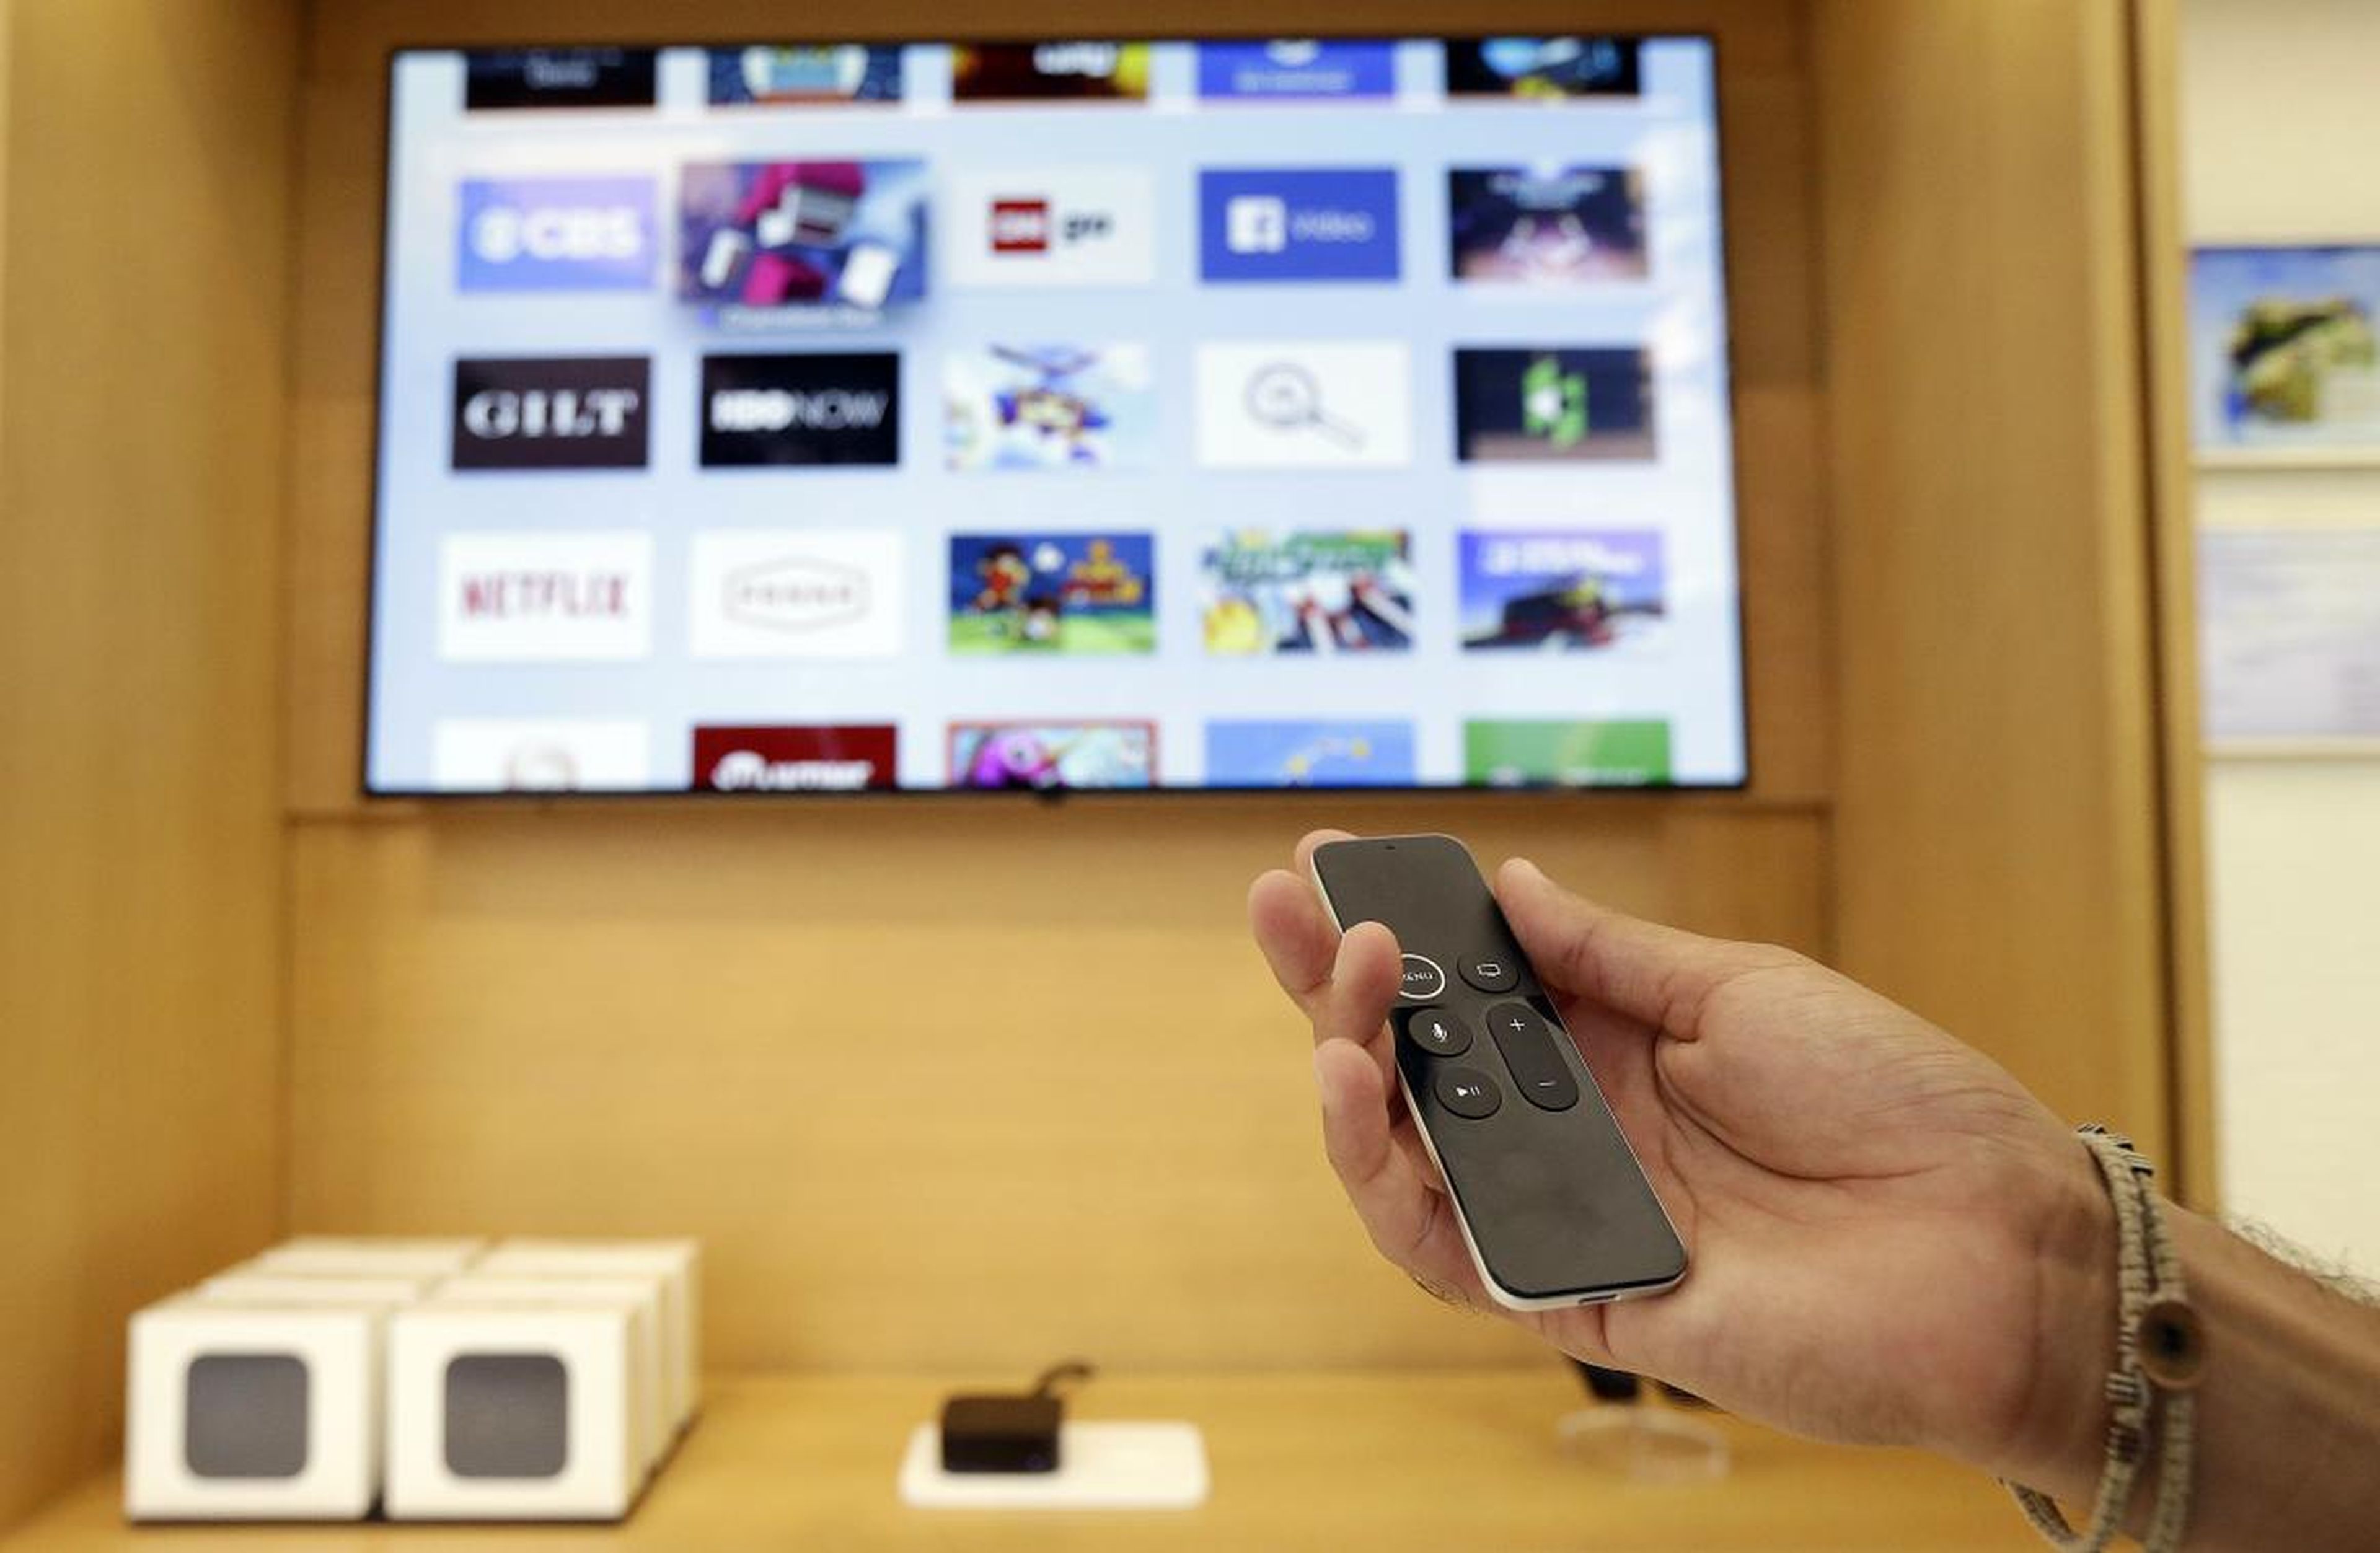 2. The Apple Watch can be a remote control for your Apple TV — and you'll never lose it!